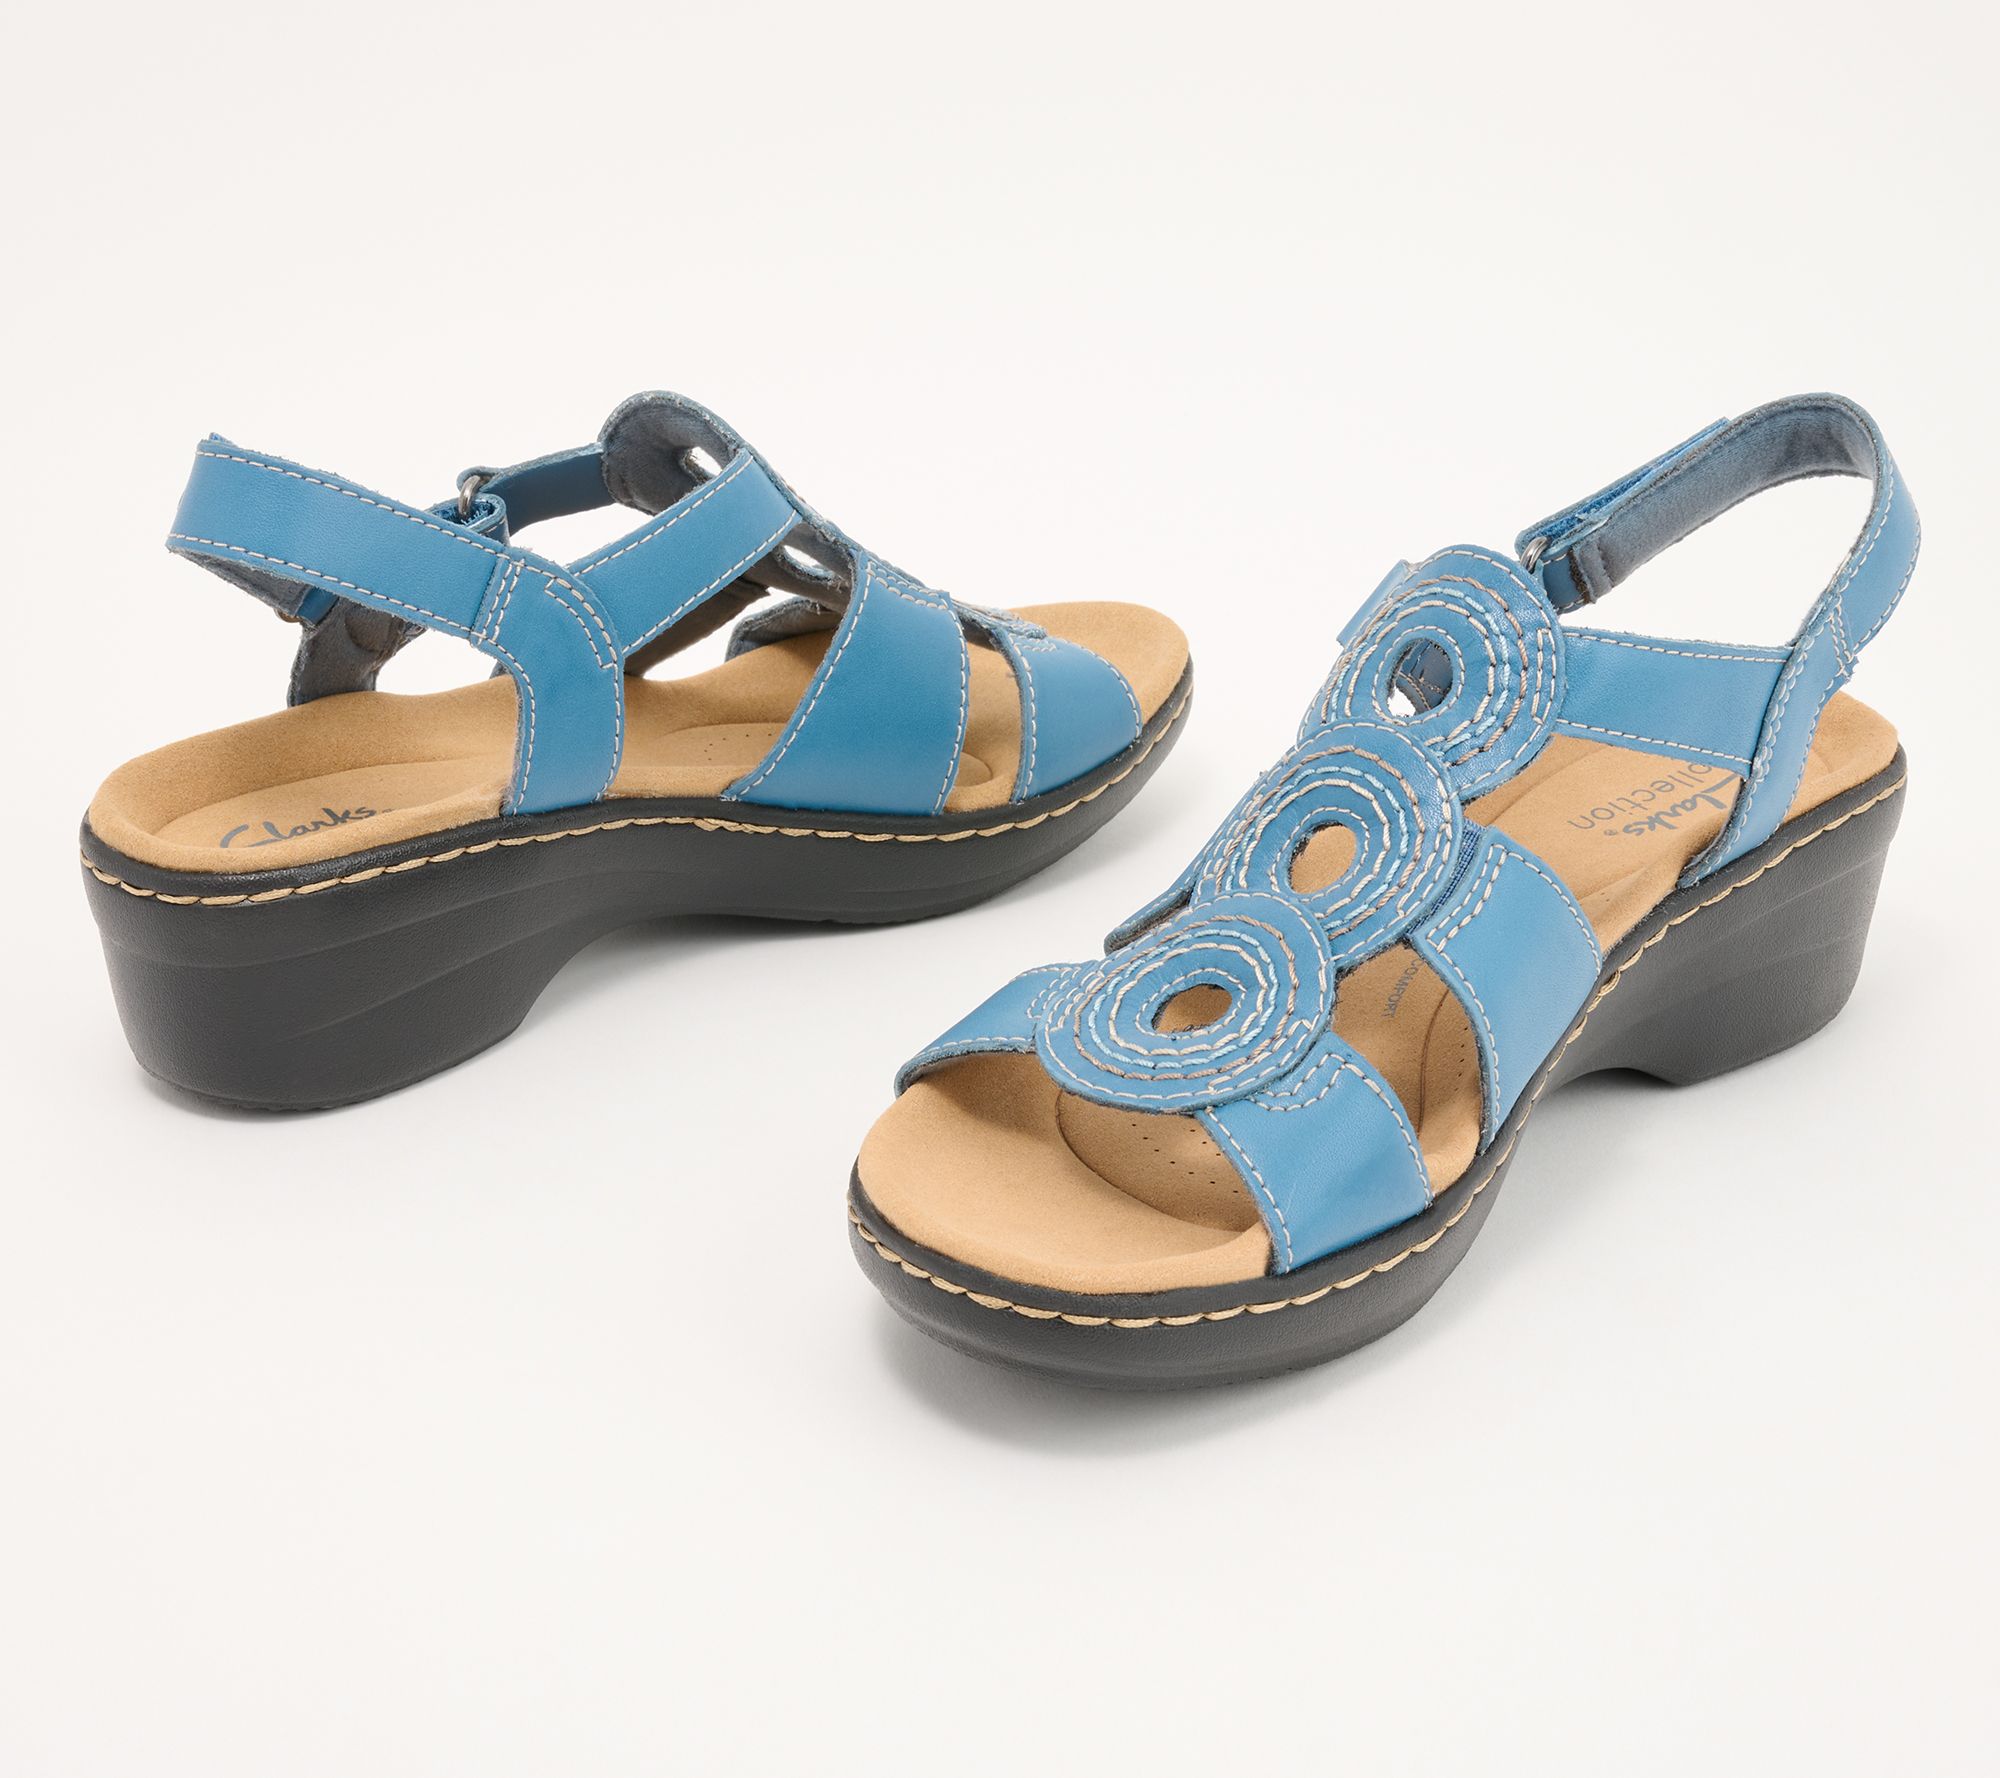 Clarks Collection Adjustable Leather Sandals Merliah Derby - QVC.com